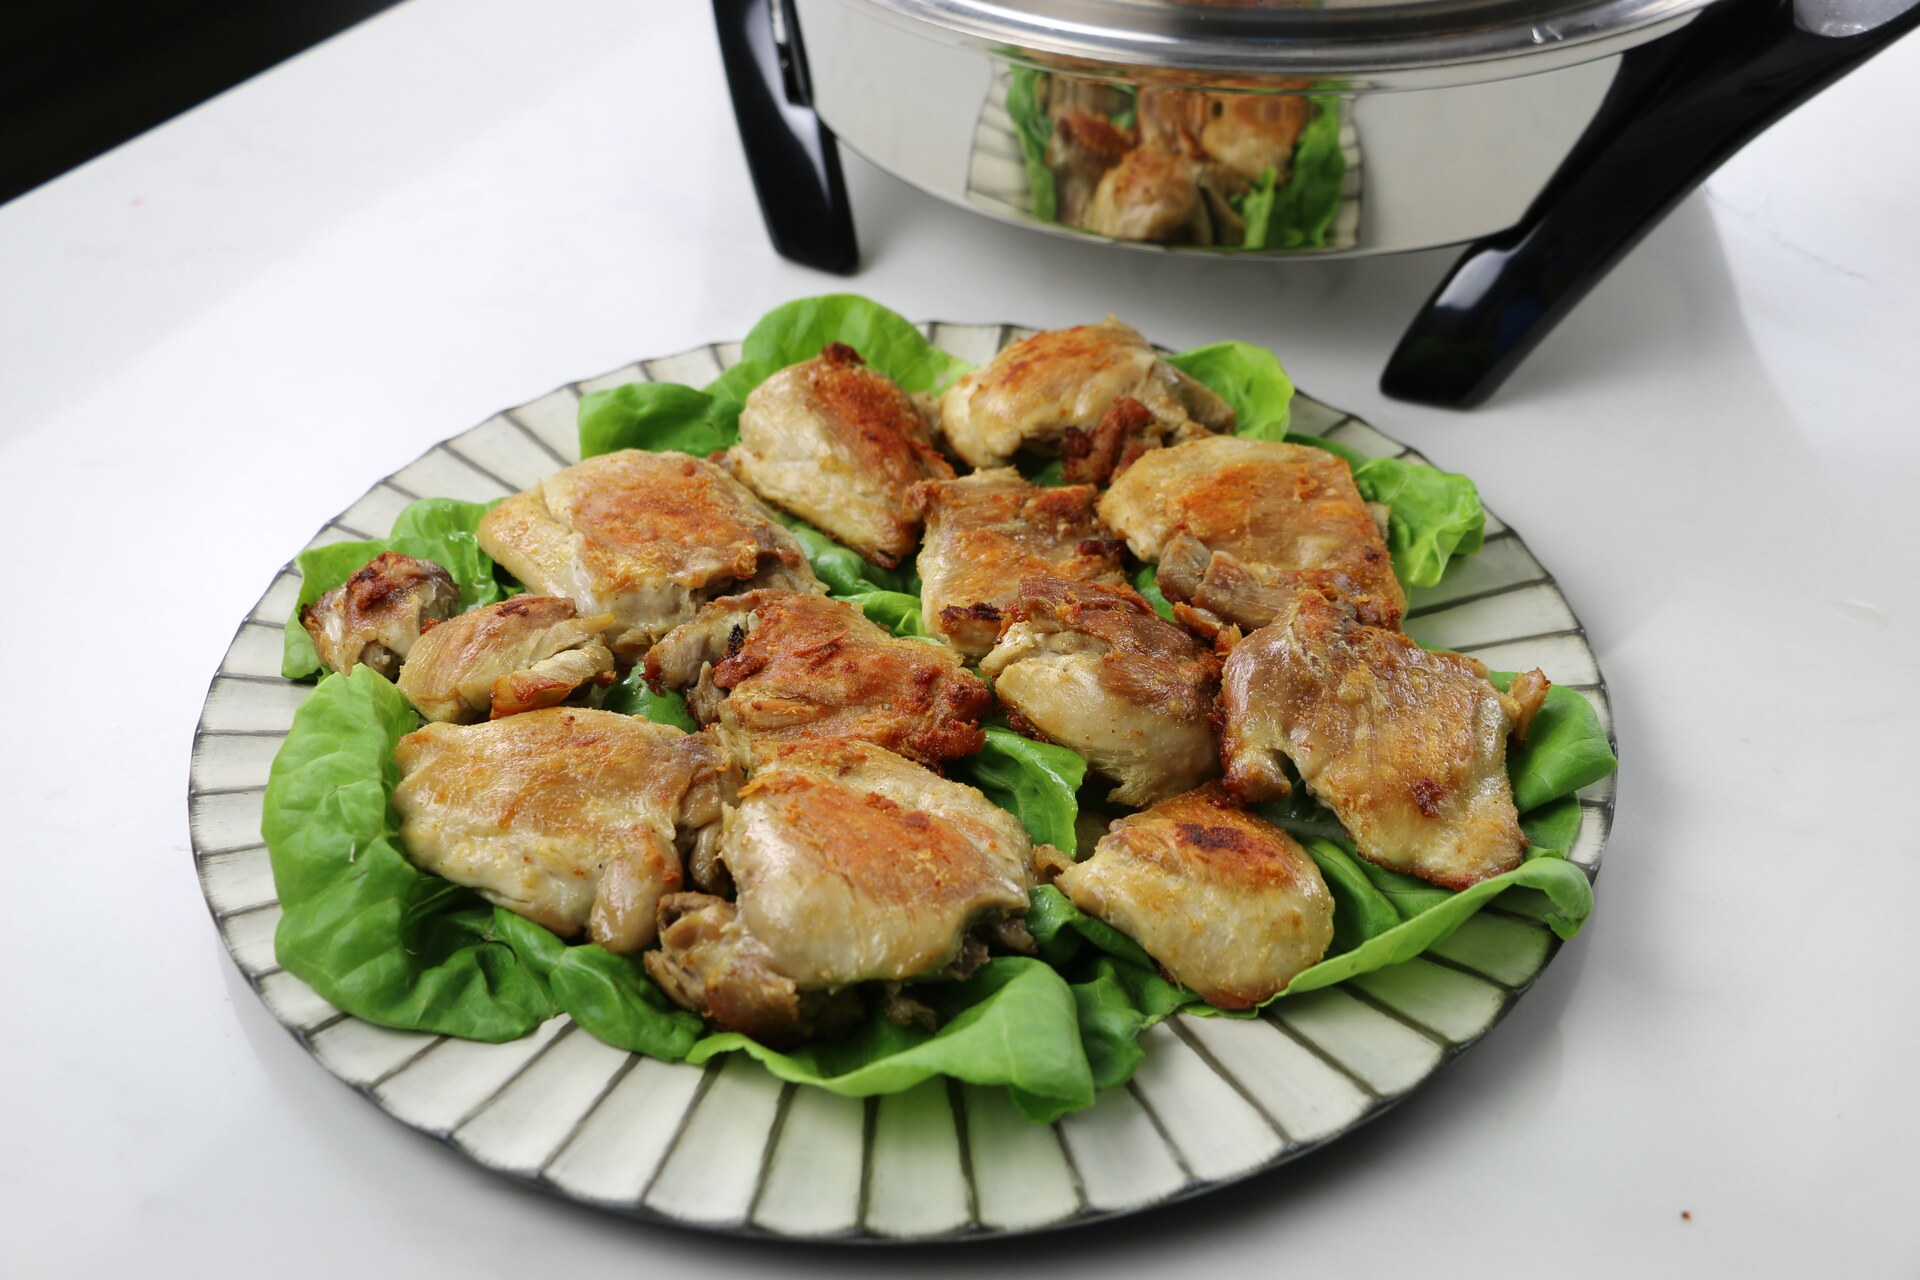 How To Cook Frozen Chicken In Electric Skillet